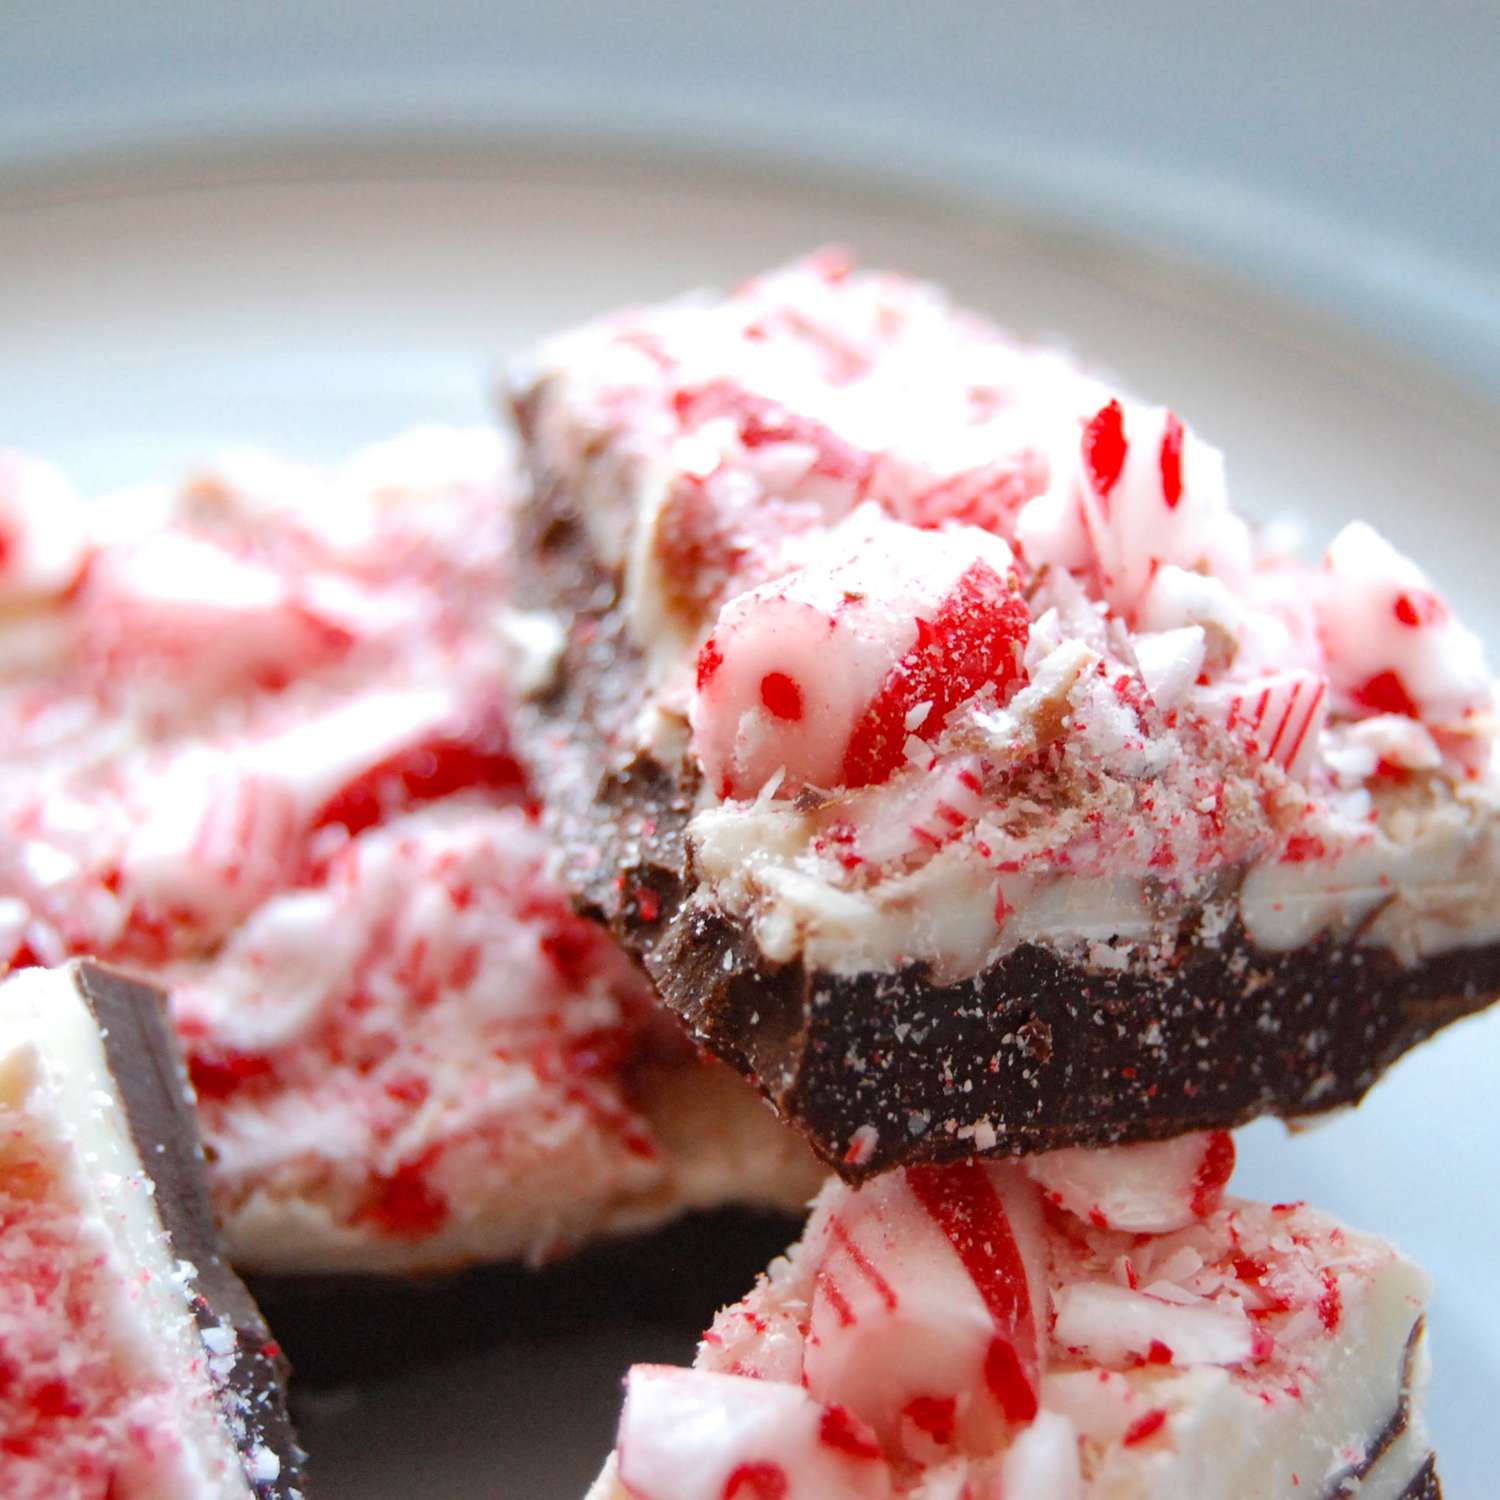 close up view of a pile of Peppermint Bark pieces on a plate